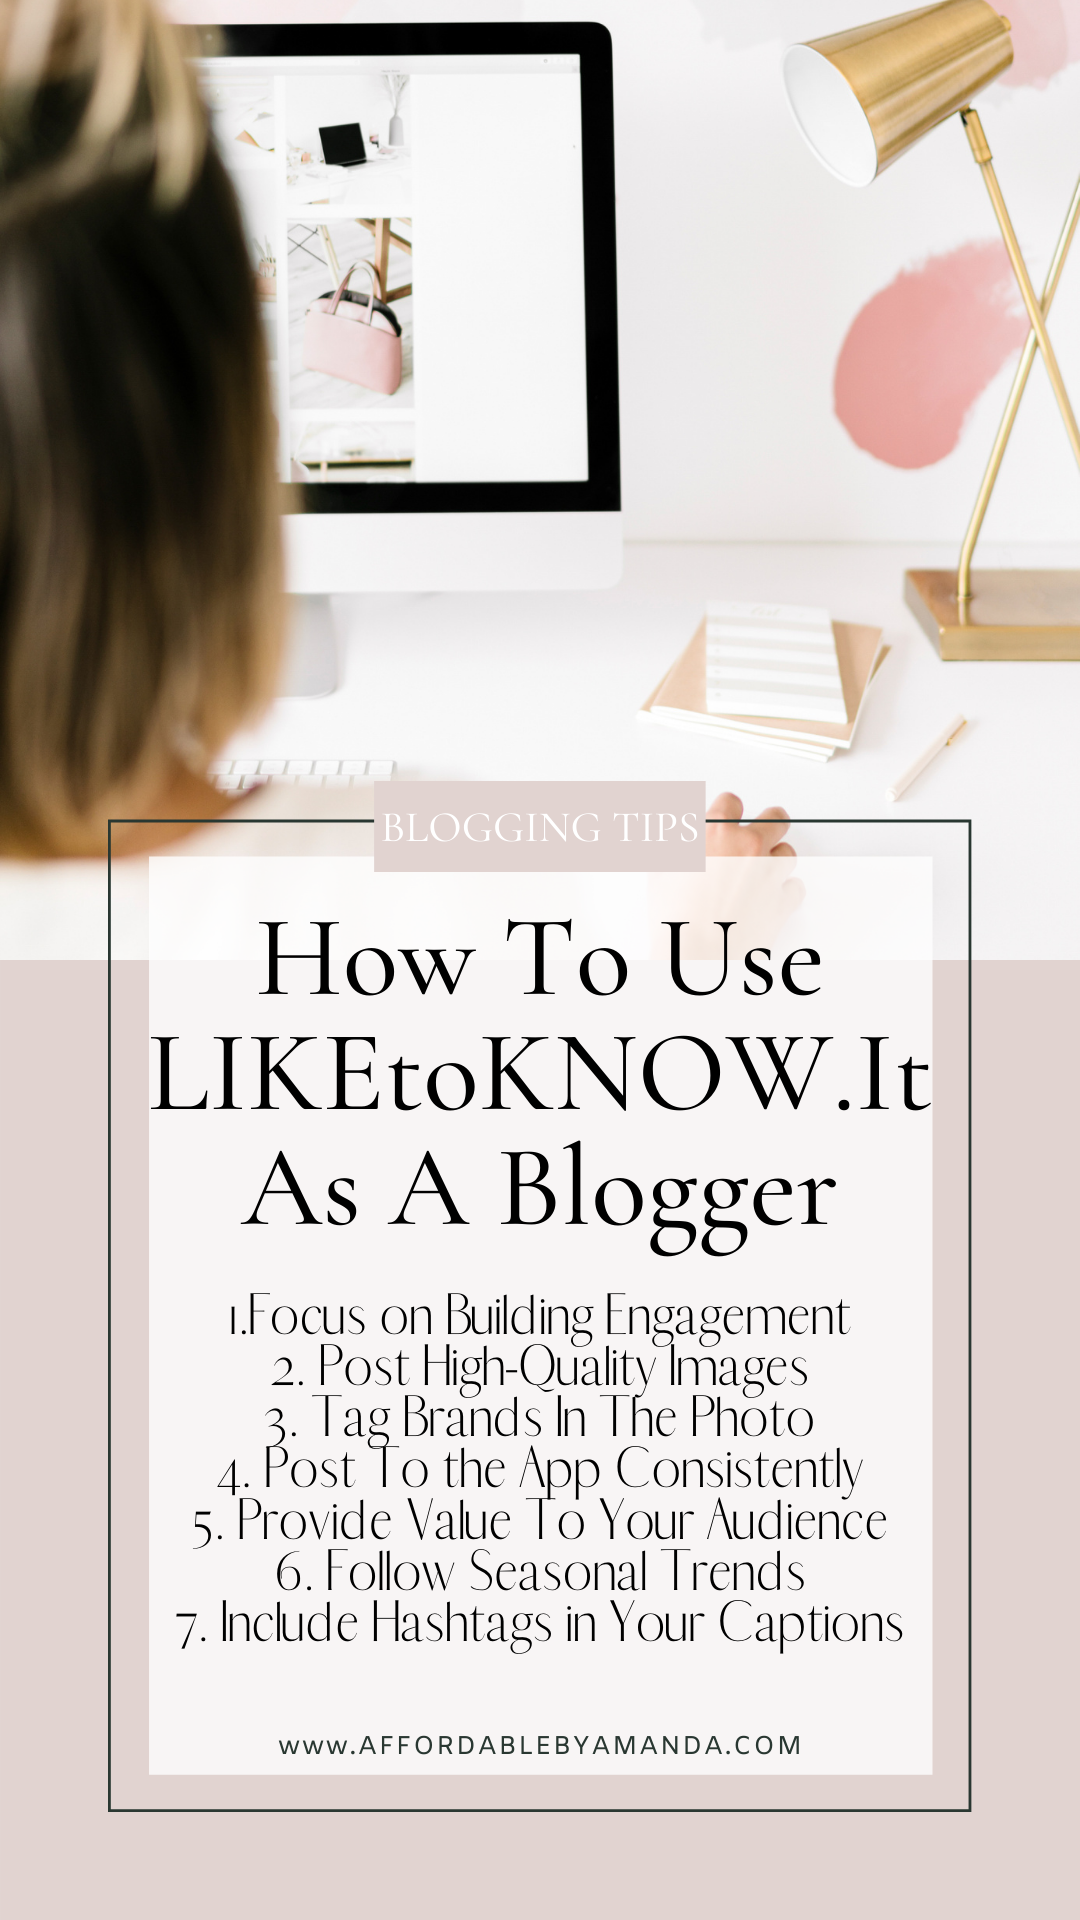 How To Use LIKEtoKNOW.It As A Blogger | How to Make Money Blogging | Affordable by Amanda 